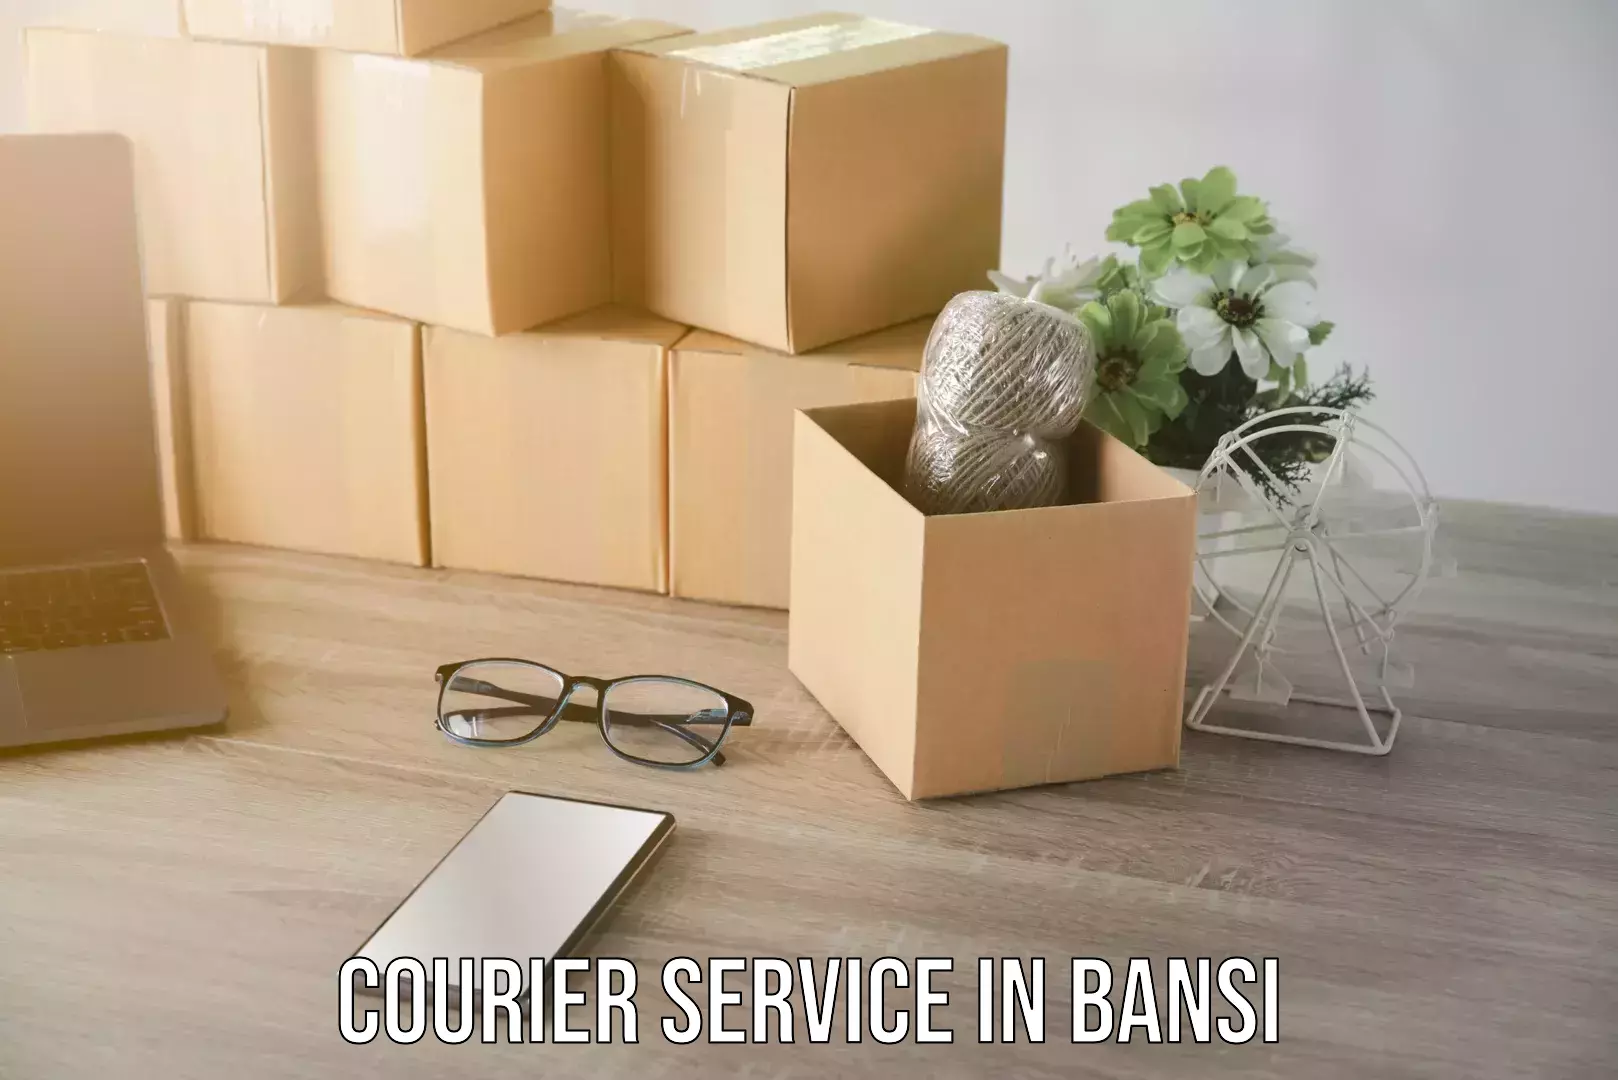 Fast delivery service in Bansi